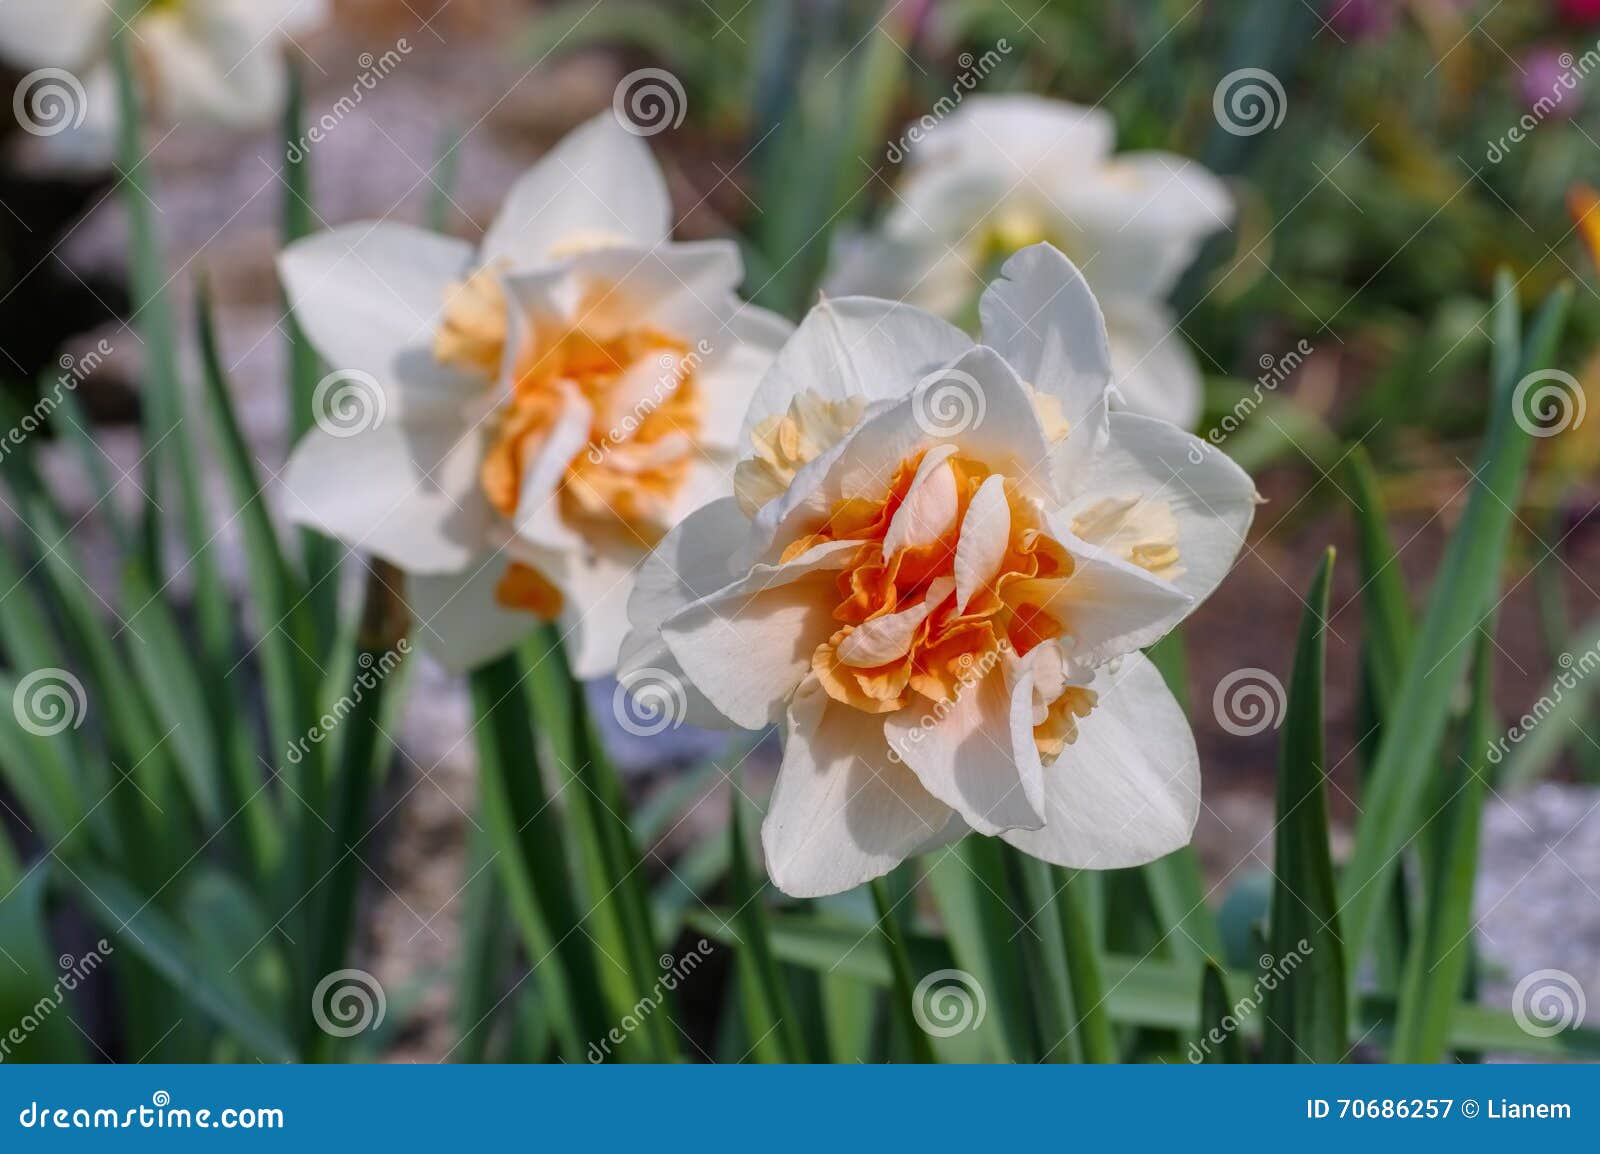 daffodil is called replete